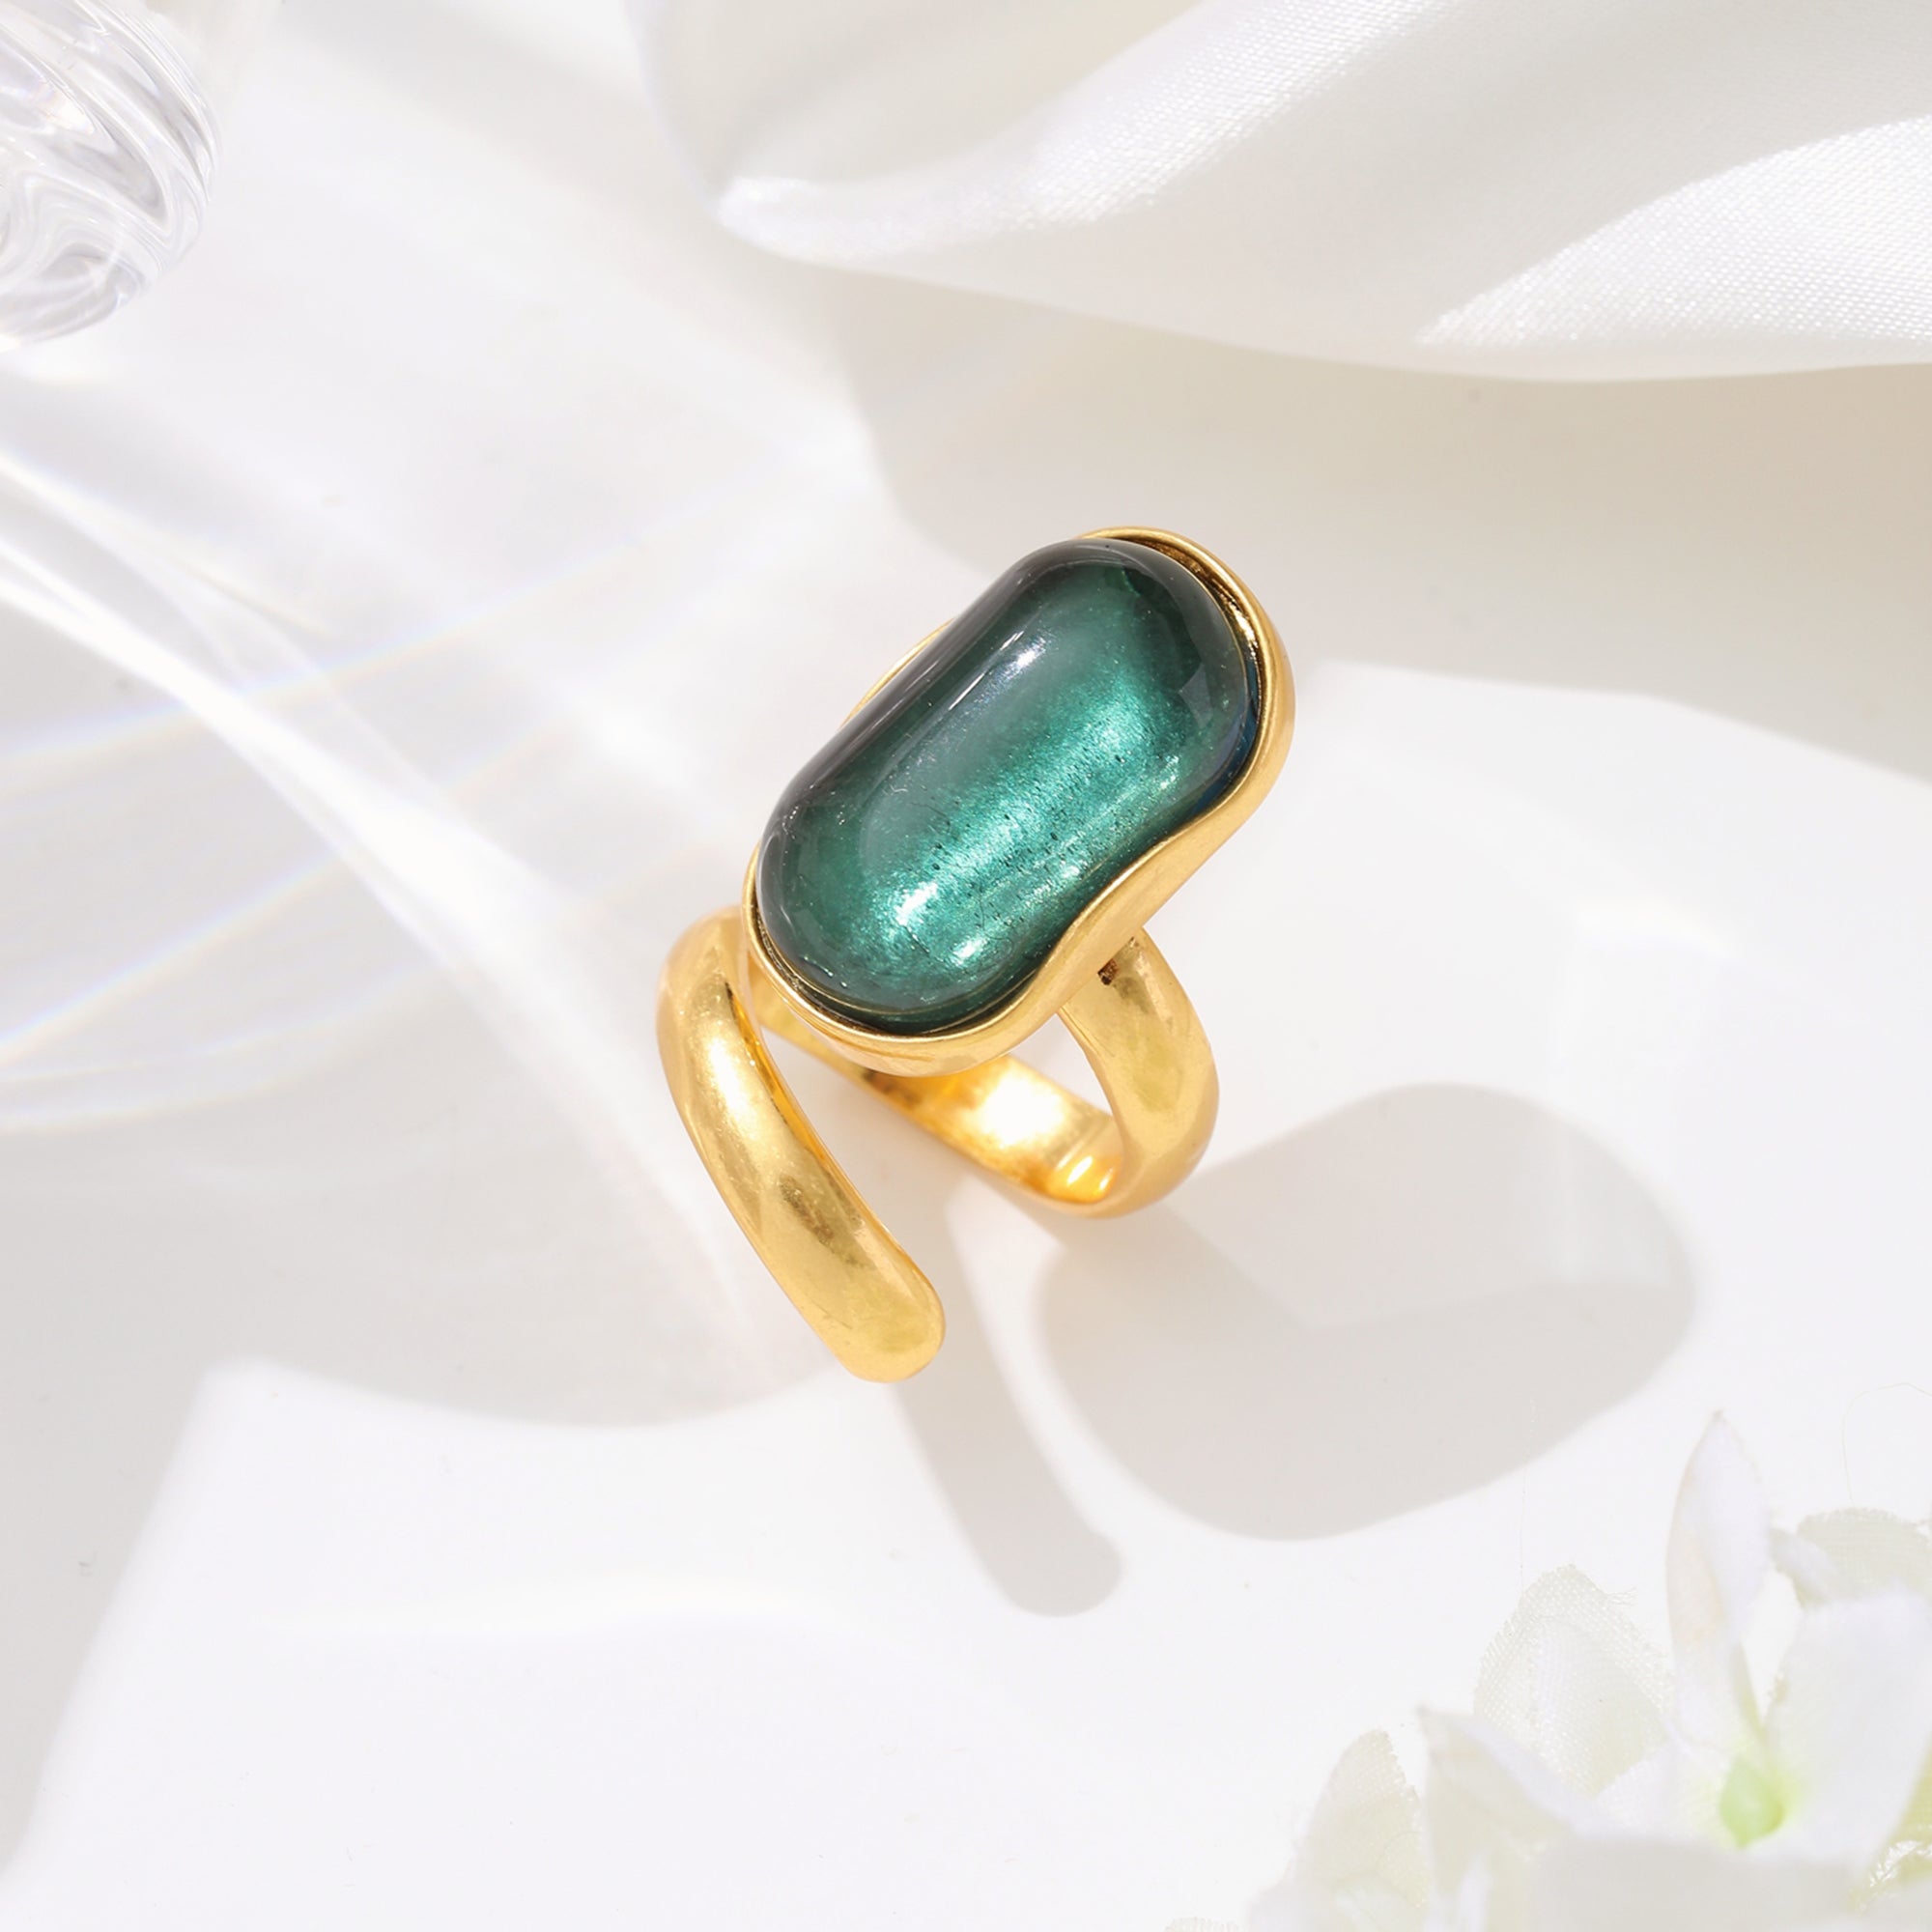 Classicharms Vintage Inspired Emerald Green Cocktail Ring